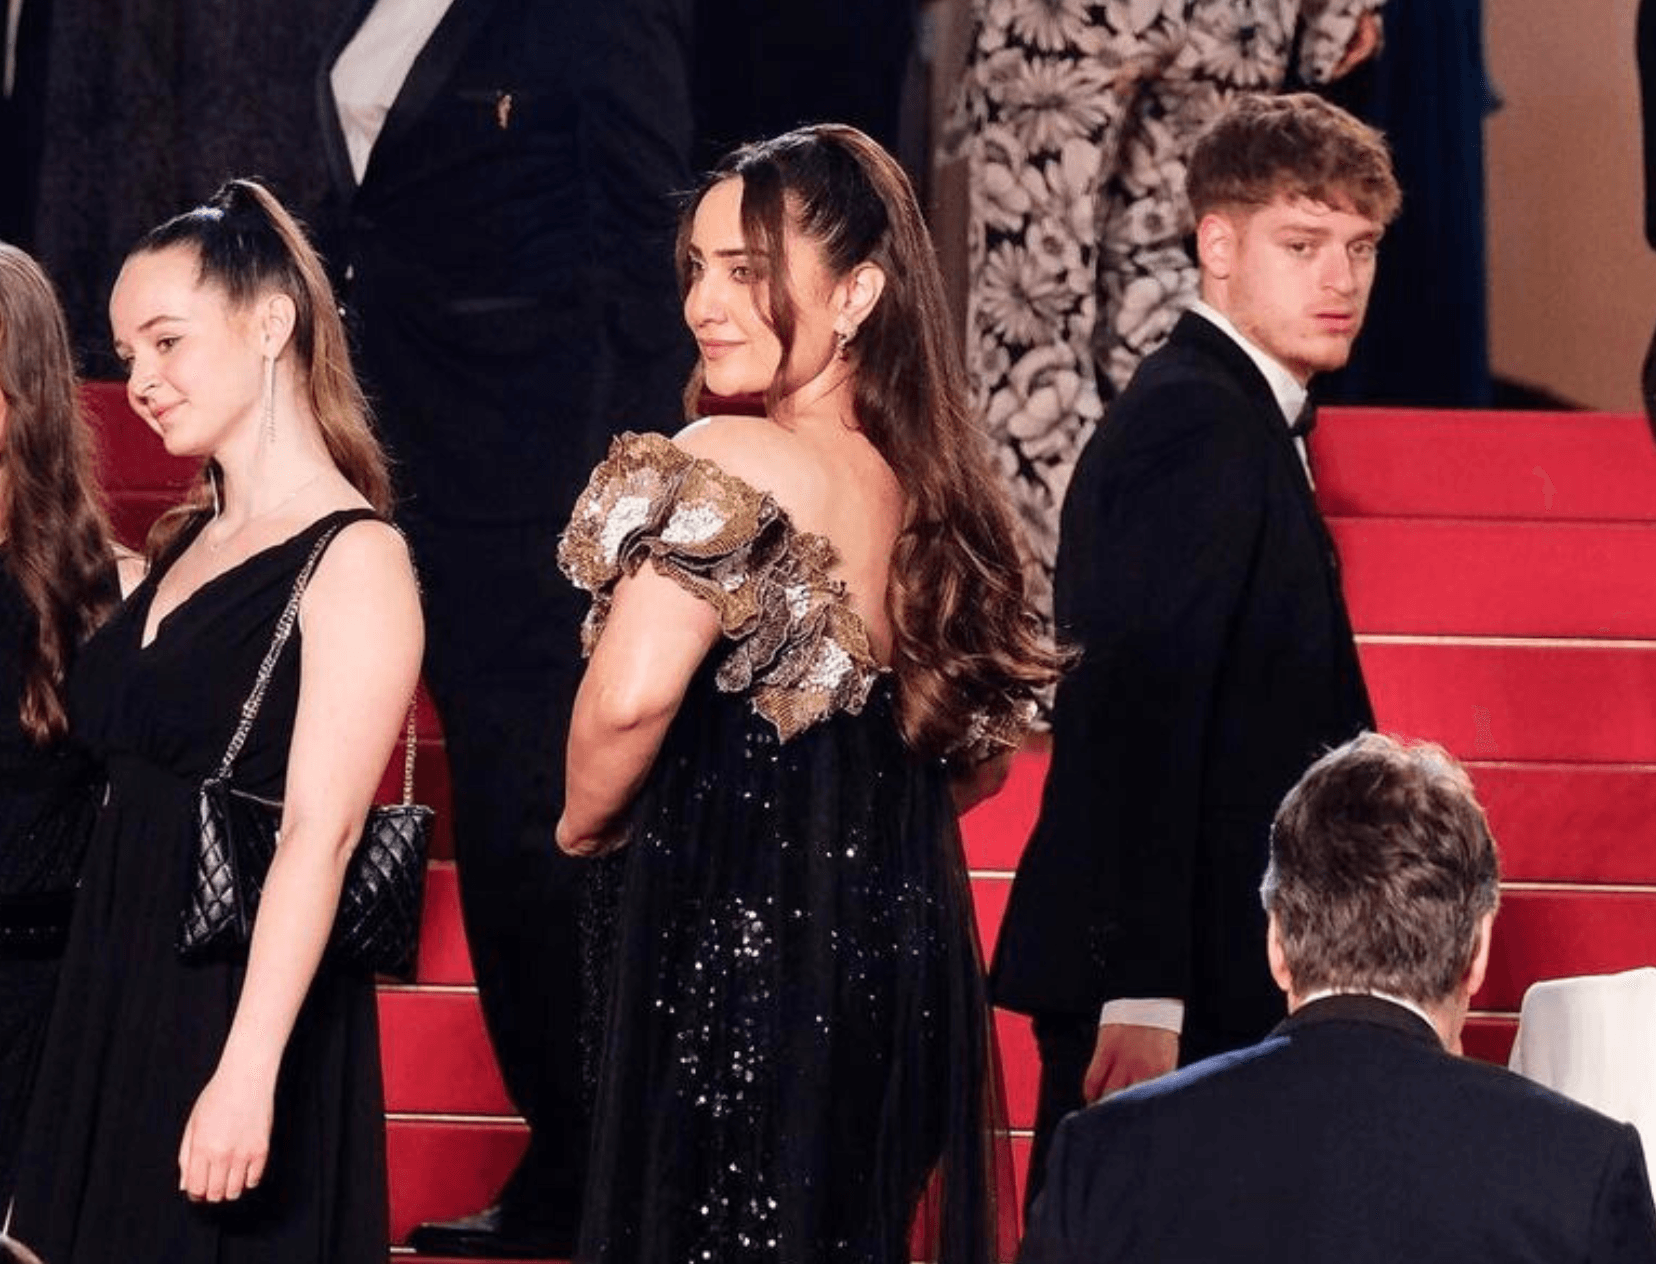 Move Aside Y’all, The New Queen Of Cannes Has Arrived!